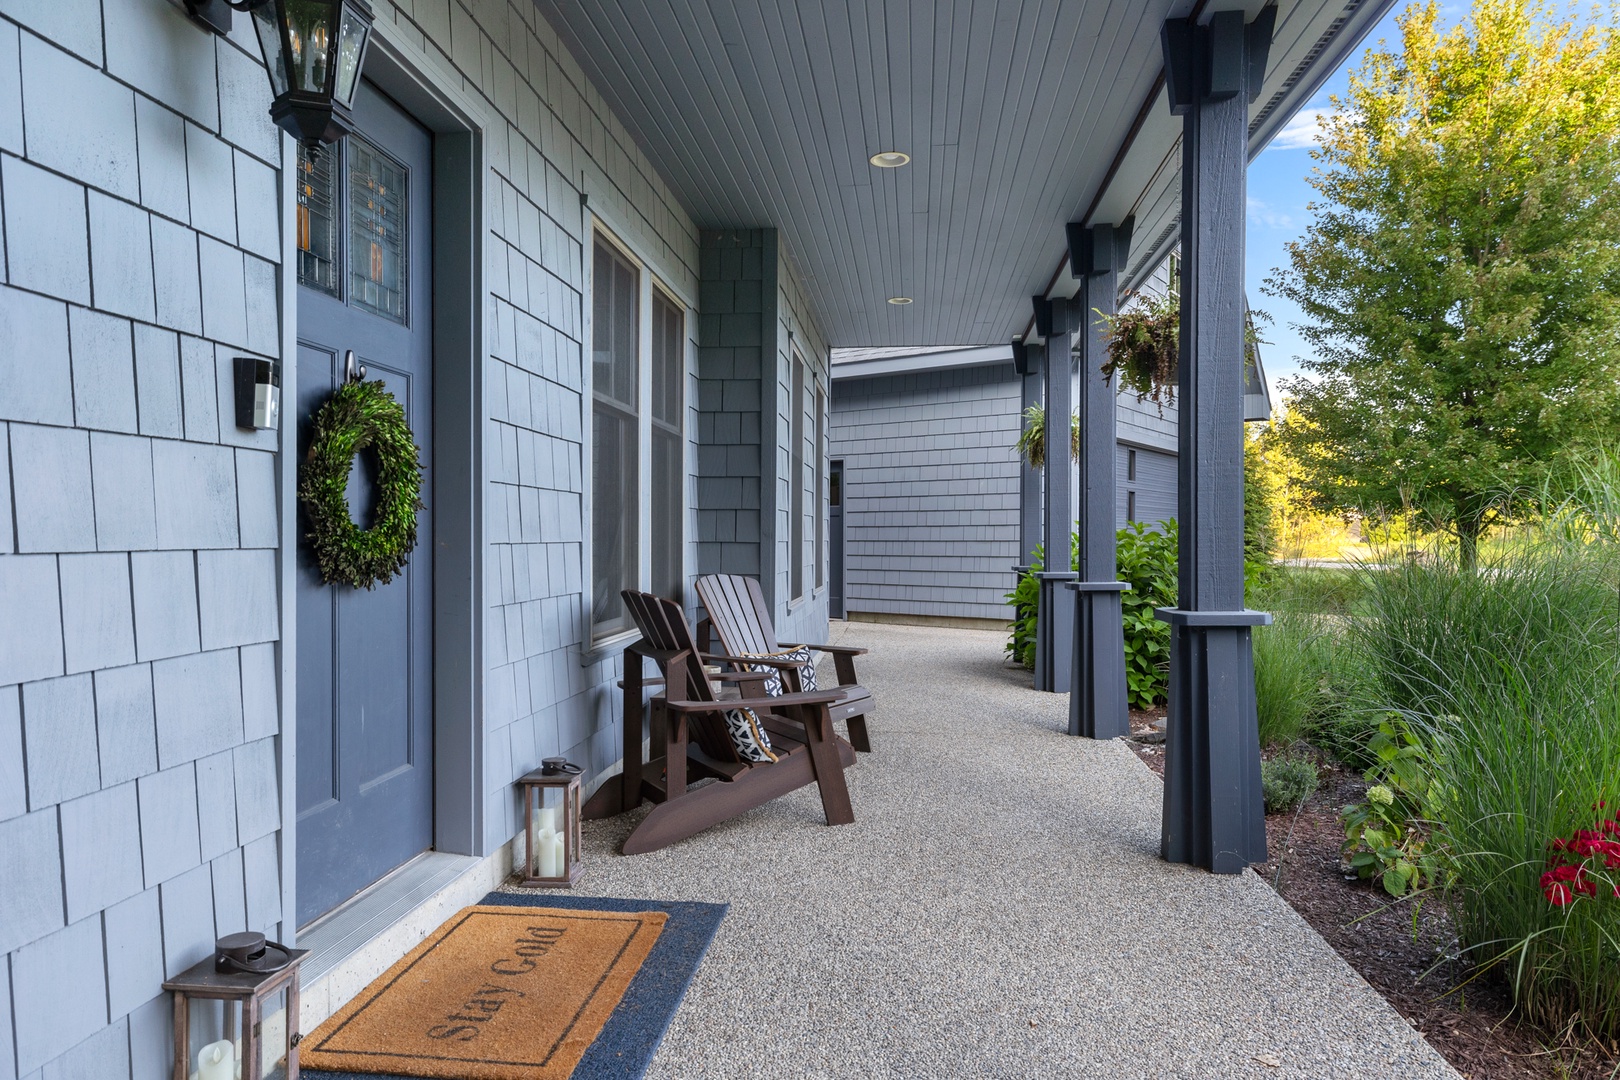 Stay Gold offers outdoor living at its finest on the beautiful front porch.